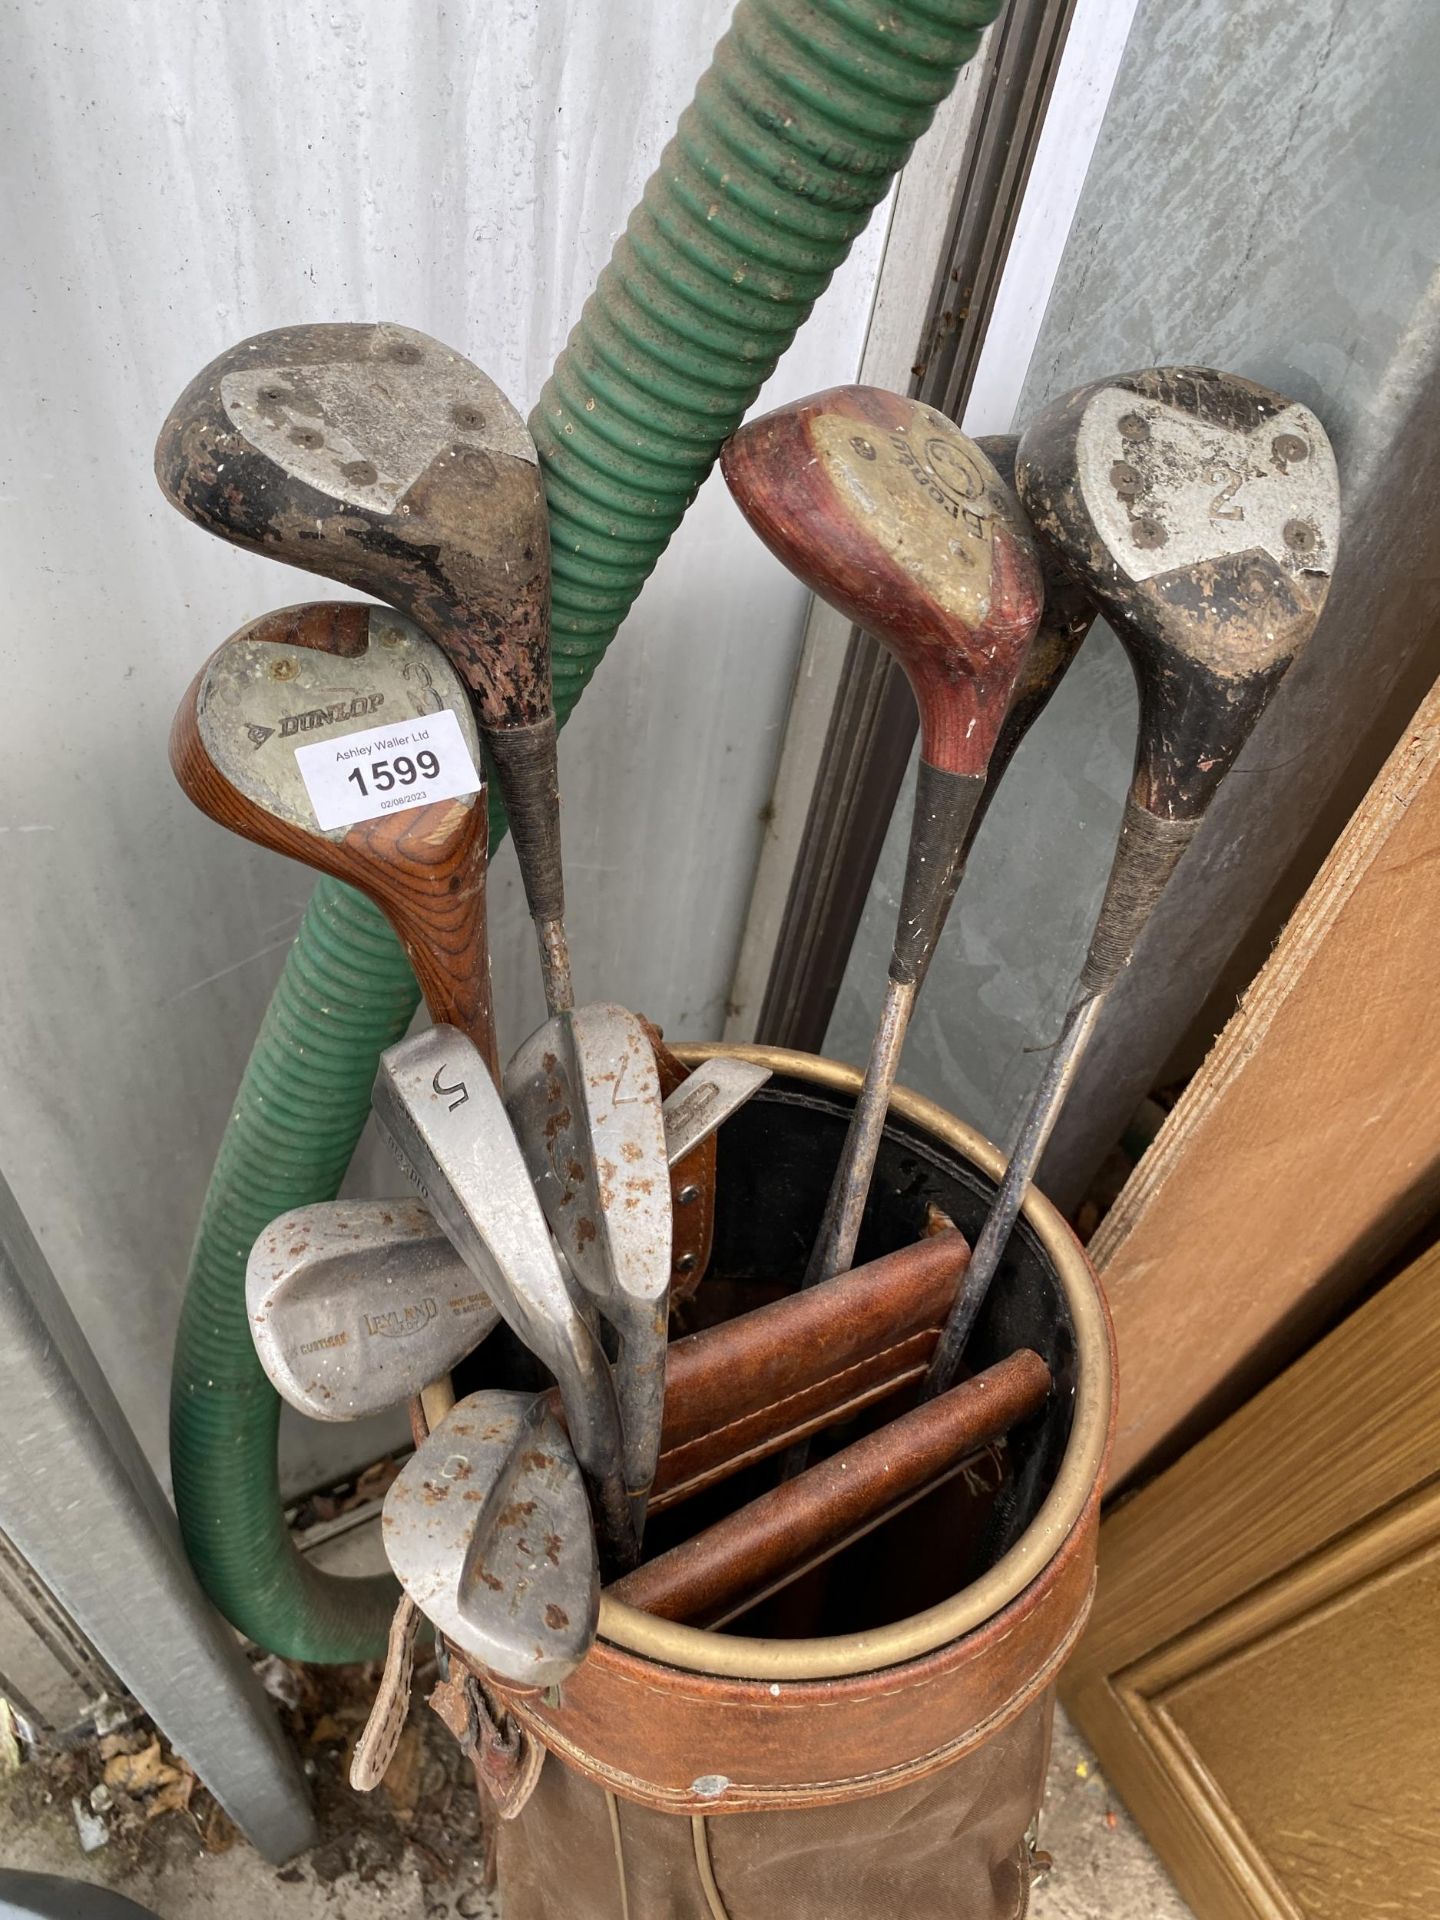 A VINTAGE GOLF BAG AND AN ASSORTMENT OF VINTAGE GOLF CLUBS - Image 2 of 3